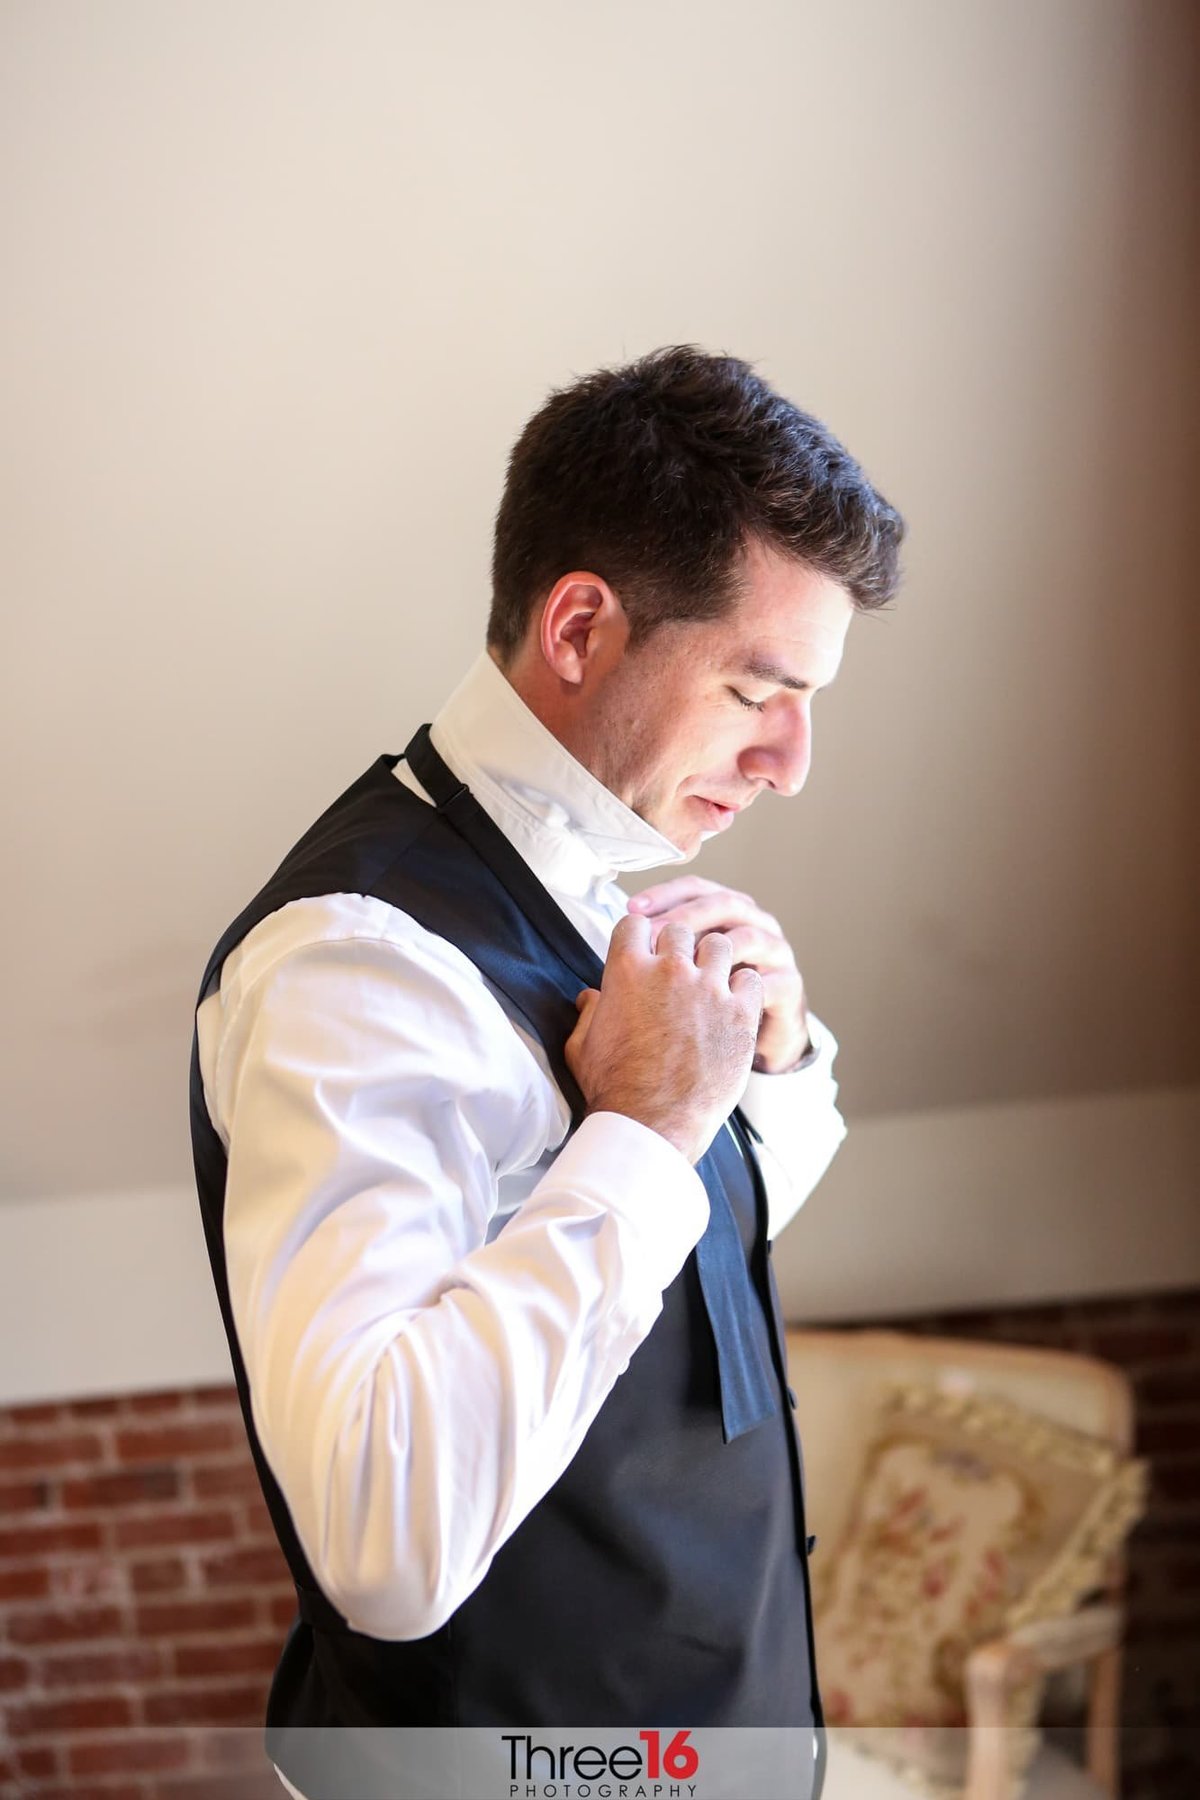 Groom putting on his tie before the ceremony